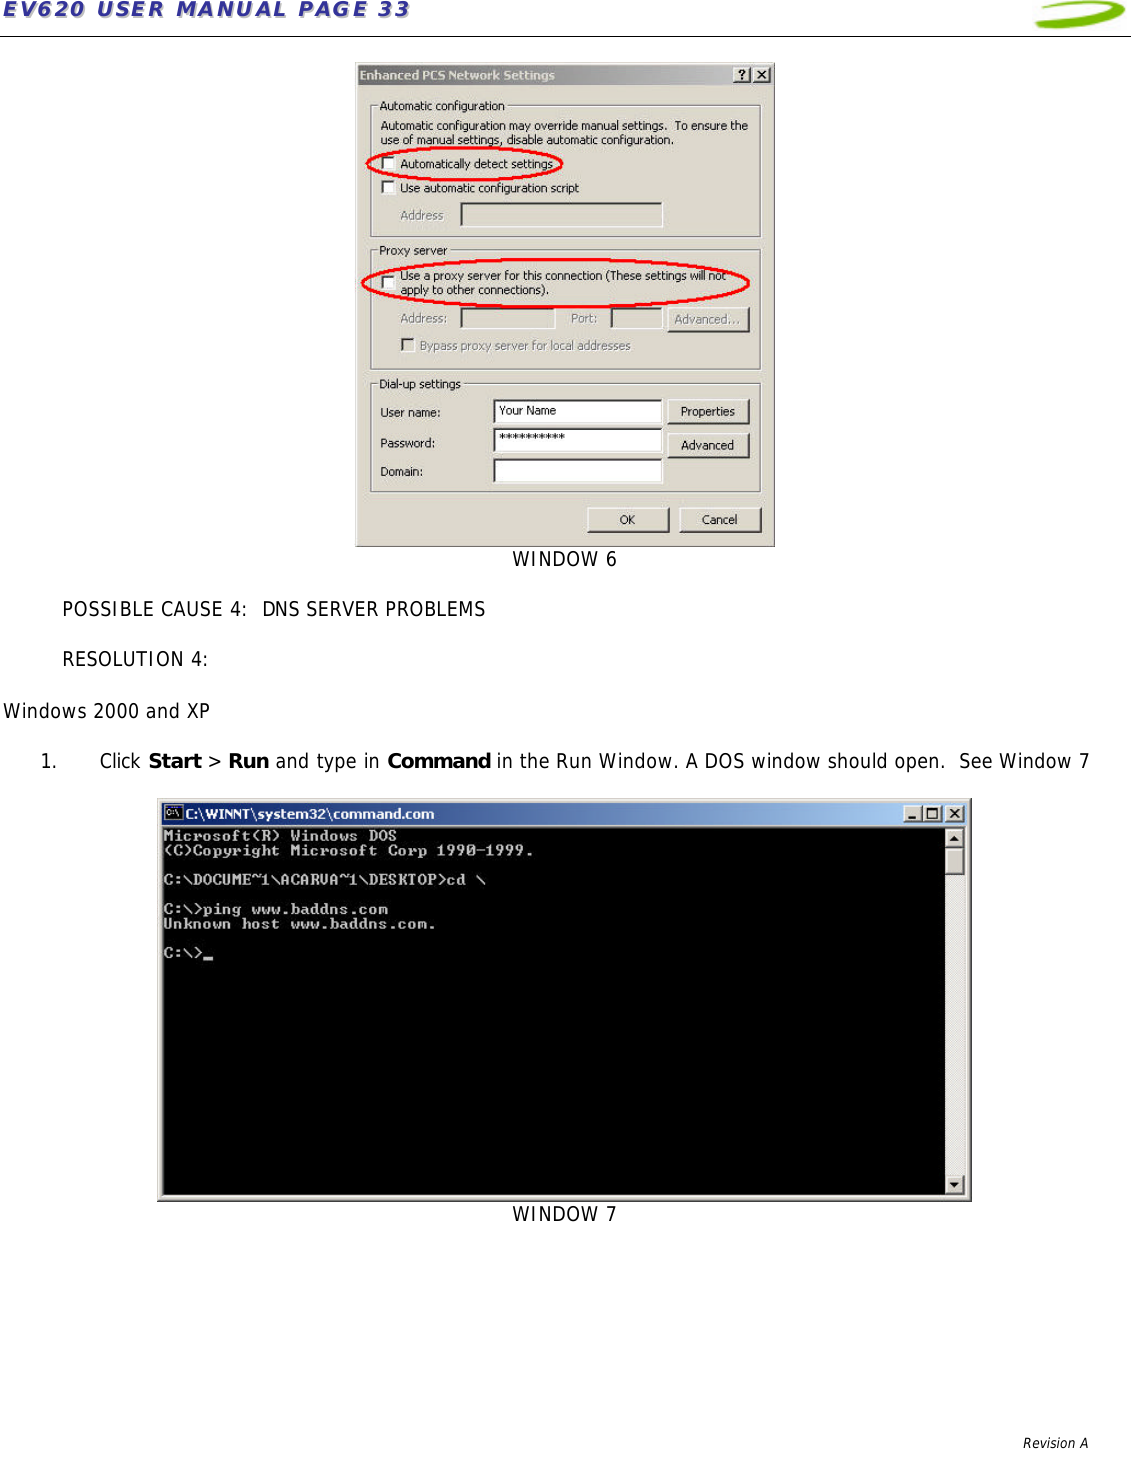 EEVV662200  UUSSEERR  MMAANNUUAALL  PPAAGGEE  3333              Revision A     WINDOW 6  POSSIBLE CAUSE 4:  DNS SERVER PROBLEMS  RESOLUTION 4:    Windows 2000 and XP  1. Click Start &gt; Run and type in Command in the Run Window. A DOS window should open.  See Window 7    WINDOW 7   